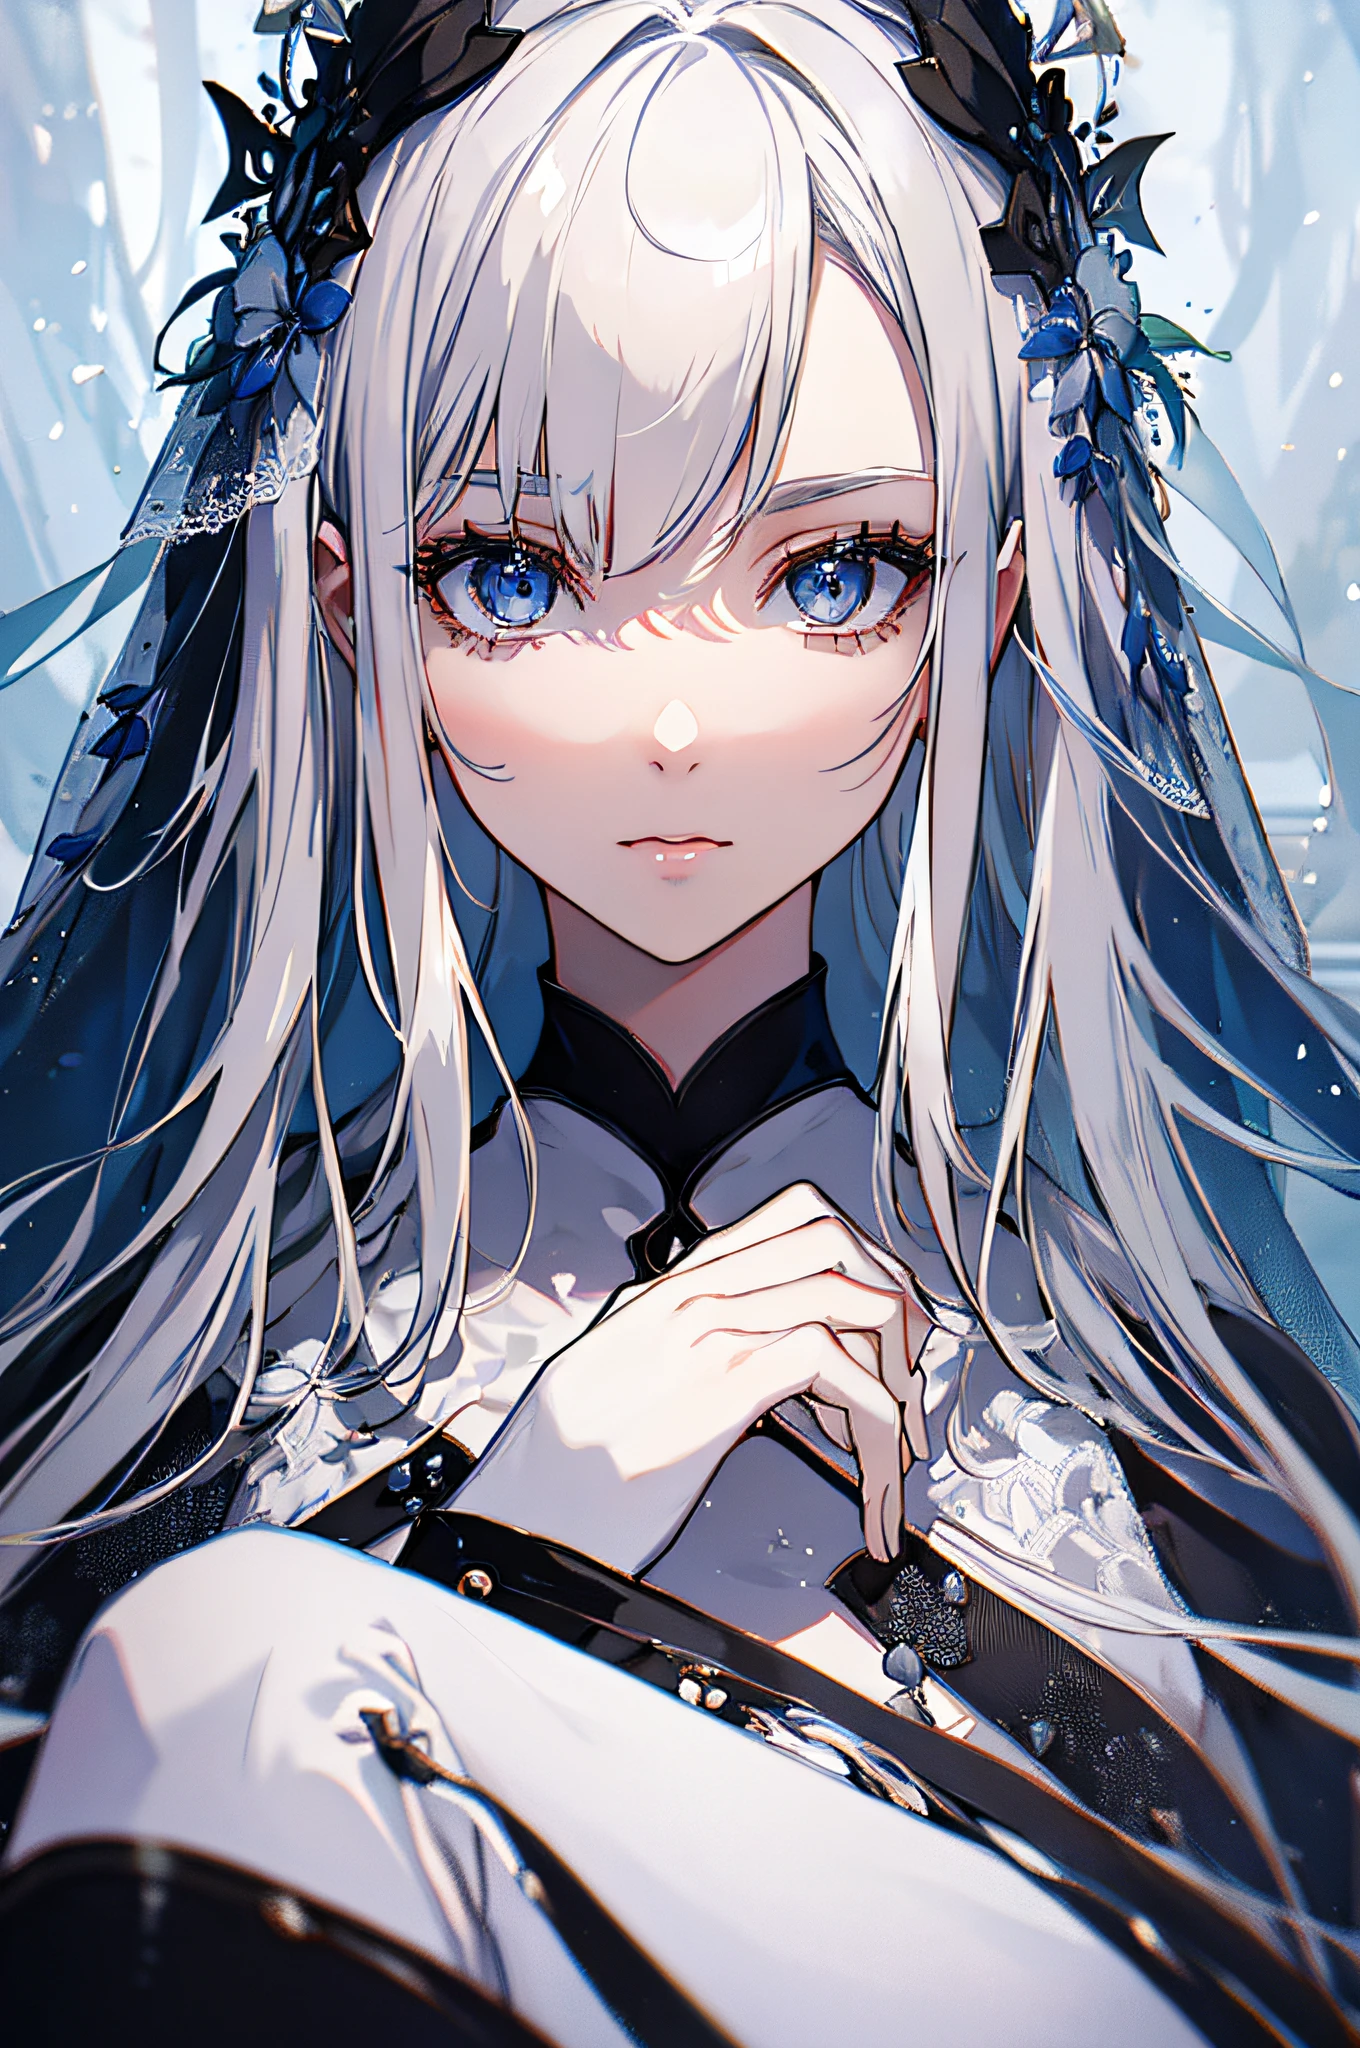 best quality,ultra-detailed,white hair,gloves,portrait,soft lighting,delicate details,realistic skin texture,subtle smile,vibrant colors,fine brushstrokes,luminous background,ethereal atmosphere,impeccable makeup,graceful pose,gentle personality,sleek design,high fashion,classic elegance,subtle patterns,textured fabric,dark background,contrast,contrast,contrast,meticulous attention to detail,neutral color palette,dreamy vibe,sublime beauty,sophisticated style,subdued lighting,artistically composed,graceful movement,pure and refined aesthetics,high-class allure,emblem of sophistication,sublime charm,timeless elegance,radiant presence,exquisite craftsmanship,soft and ethereal imagery,sensual and mysterious,white lace veil,majestic and alluring silhouette,intense gaze.